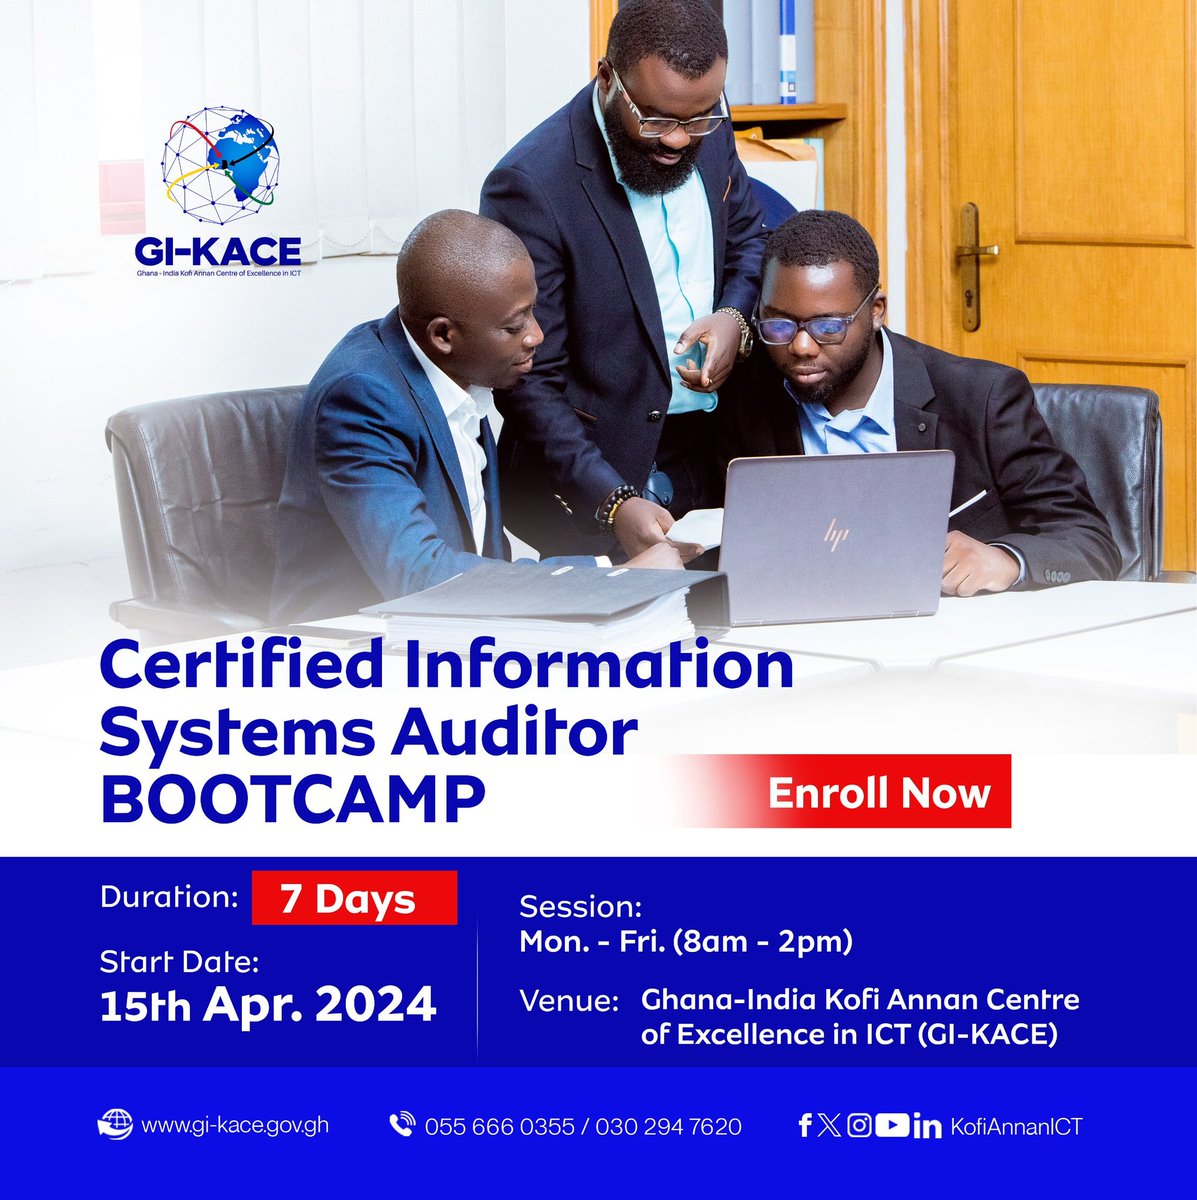 Join our one-week intensive CISA course to boost your career and meet the global demand for networking professionals.

Call us 0556660355 now.

#GIKACE #KofiAnnanICTCentre #GhanaIndiaKofiAnnanCentreOfExcellenceinICT